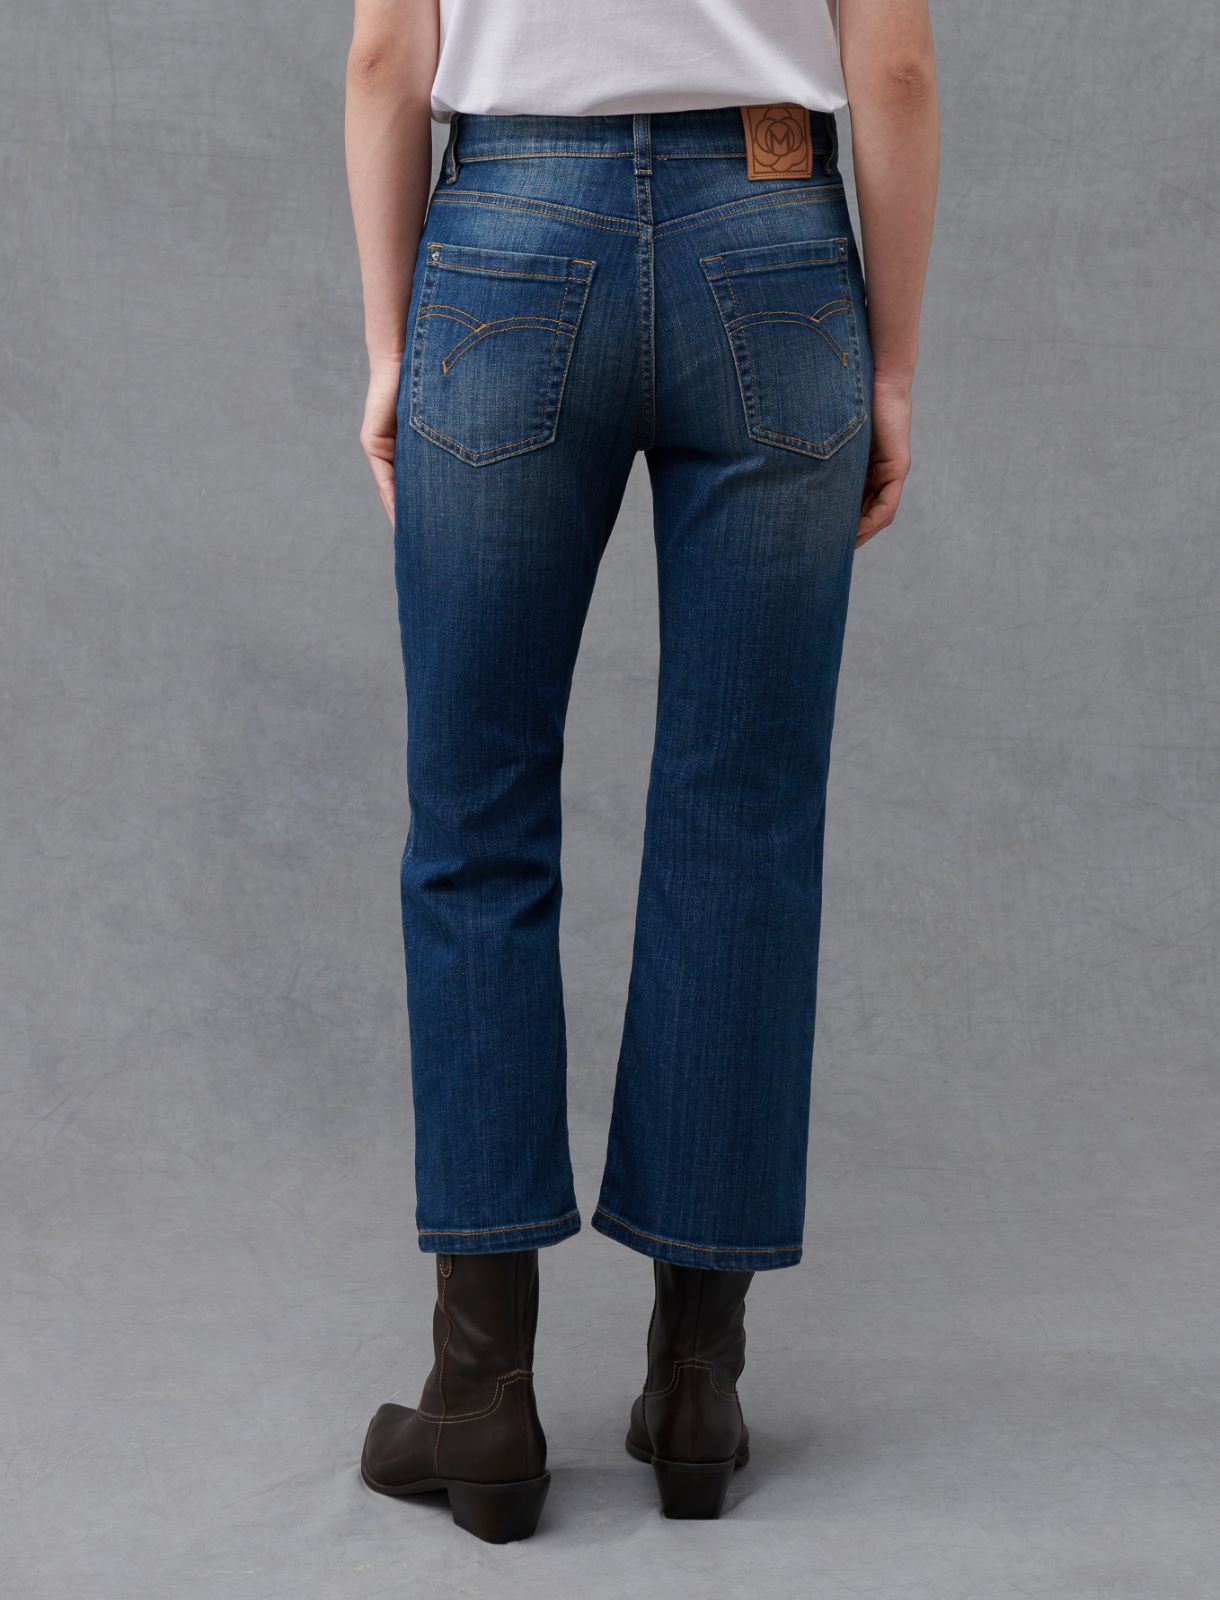 Jeans flare - Blue jeans - Marella - 4